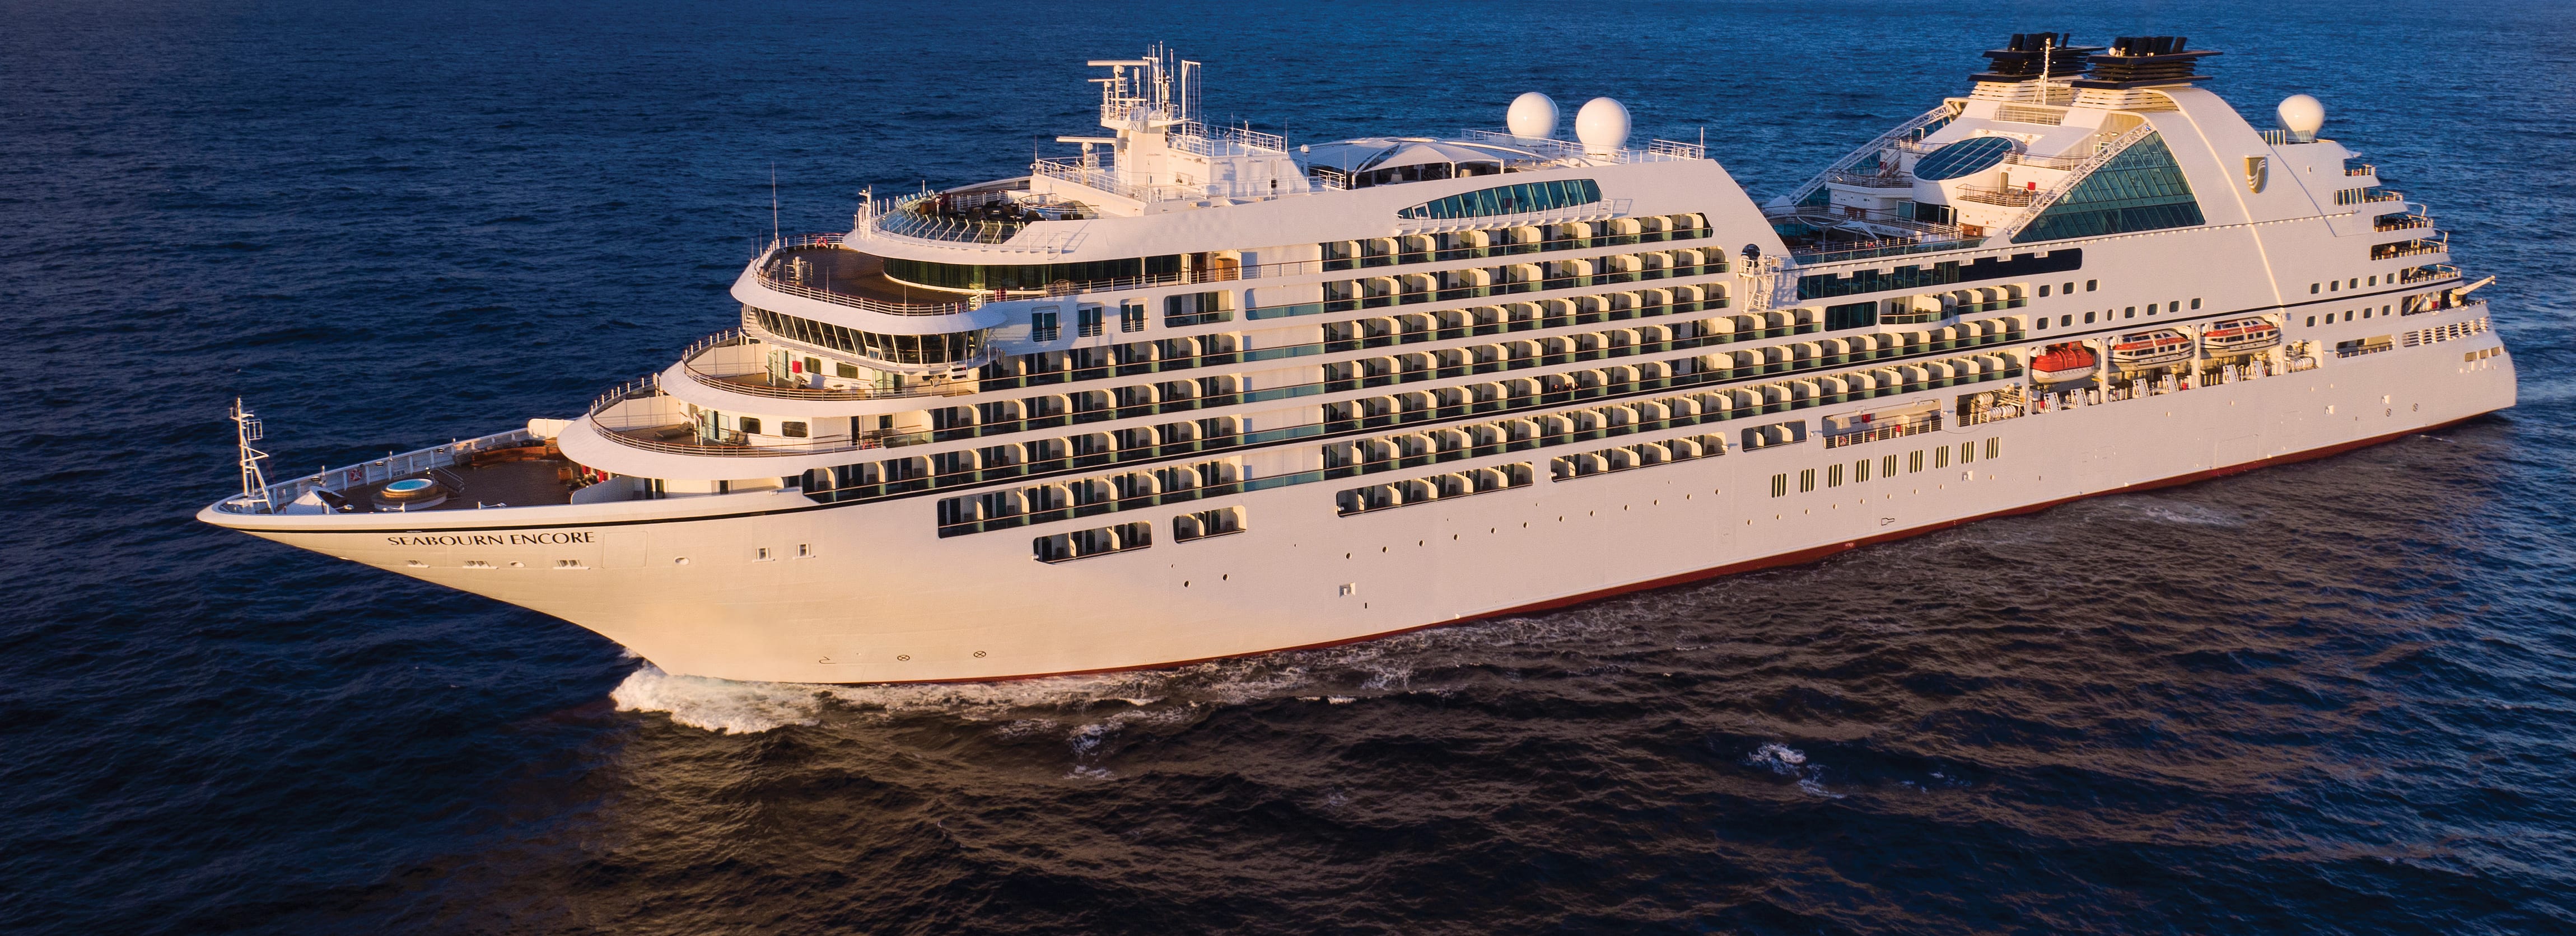 seabourn cruises for singles